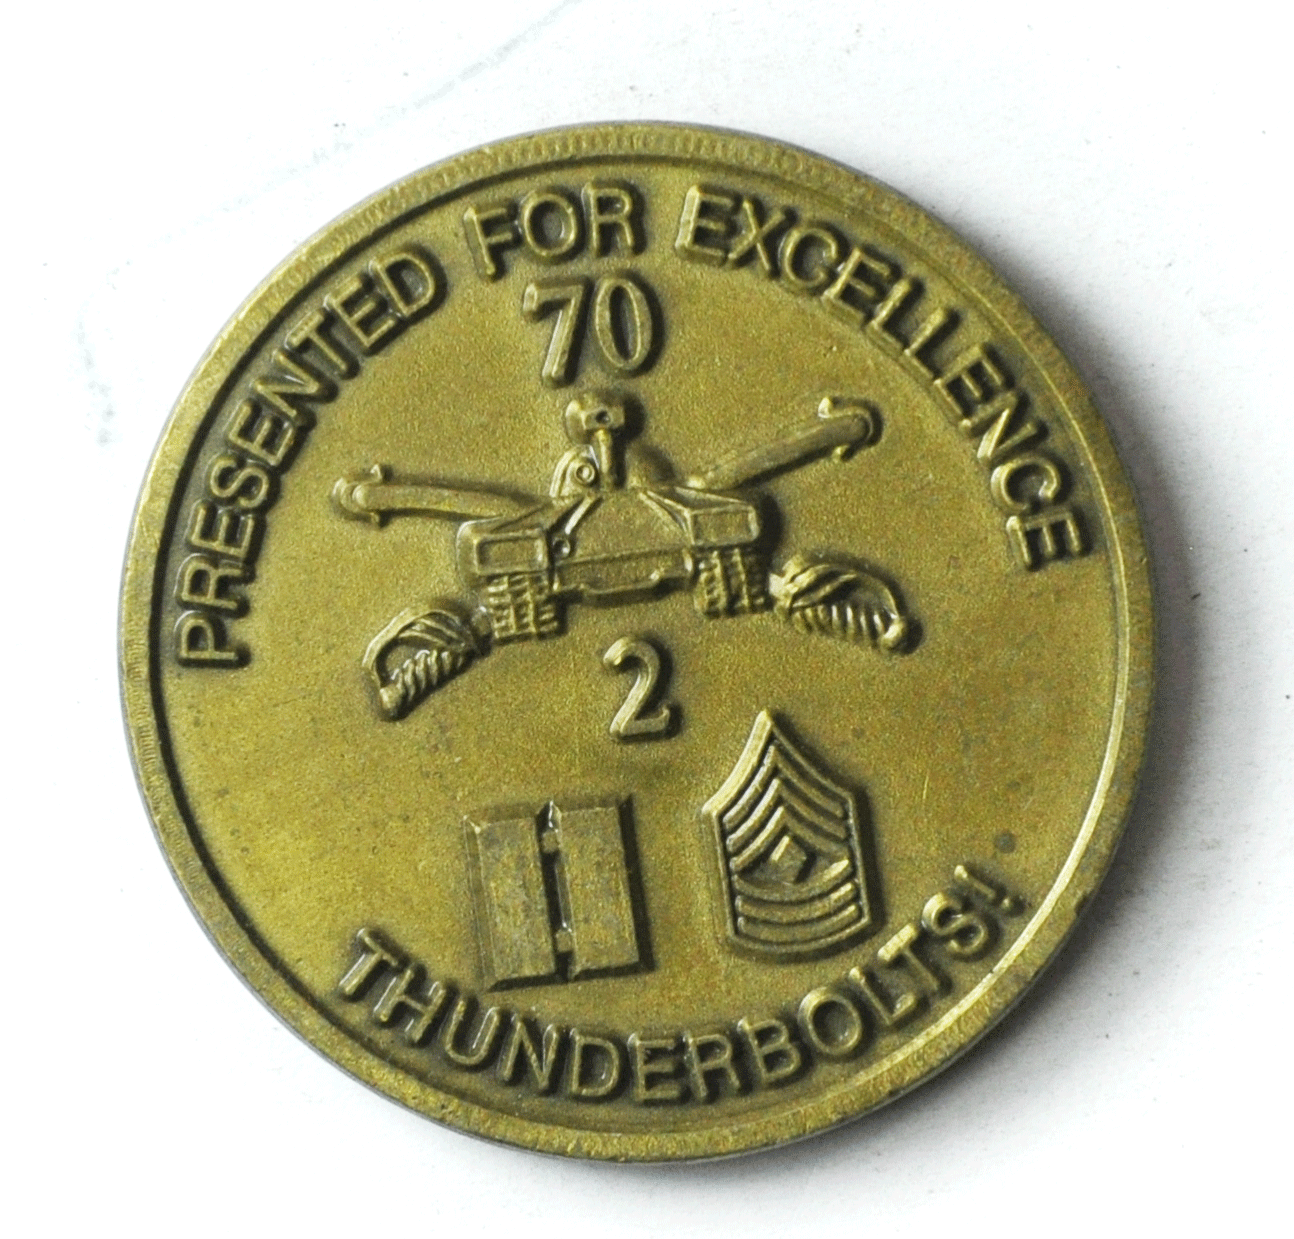 Charlie Company Cobras Excellence 40mm Medal Thunderbolts 70 2